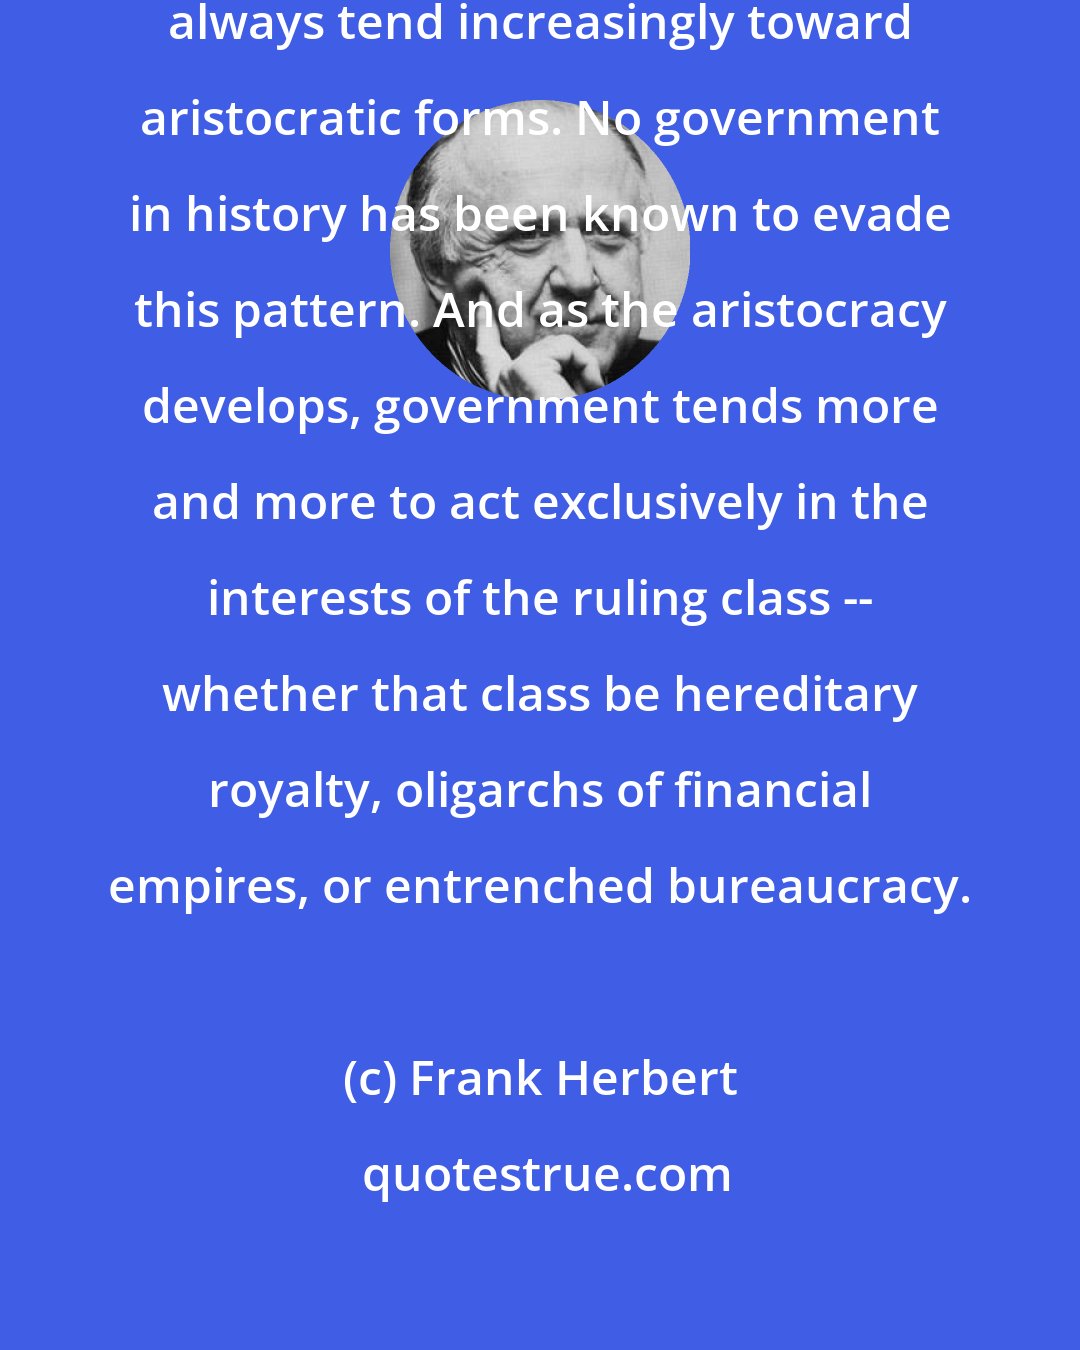 Frank Herbert: Governments, if they endure, always tend increasingly toward aristocratic forms. No government in history has been known to evade this pattern. And as the aristocracy develops, government tends more and more to act exclusively in the interests of the ruling class -- whether that class be hereditary royalty, oligarchs of financial empires, or entrenched bureaucracy.